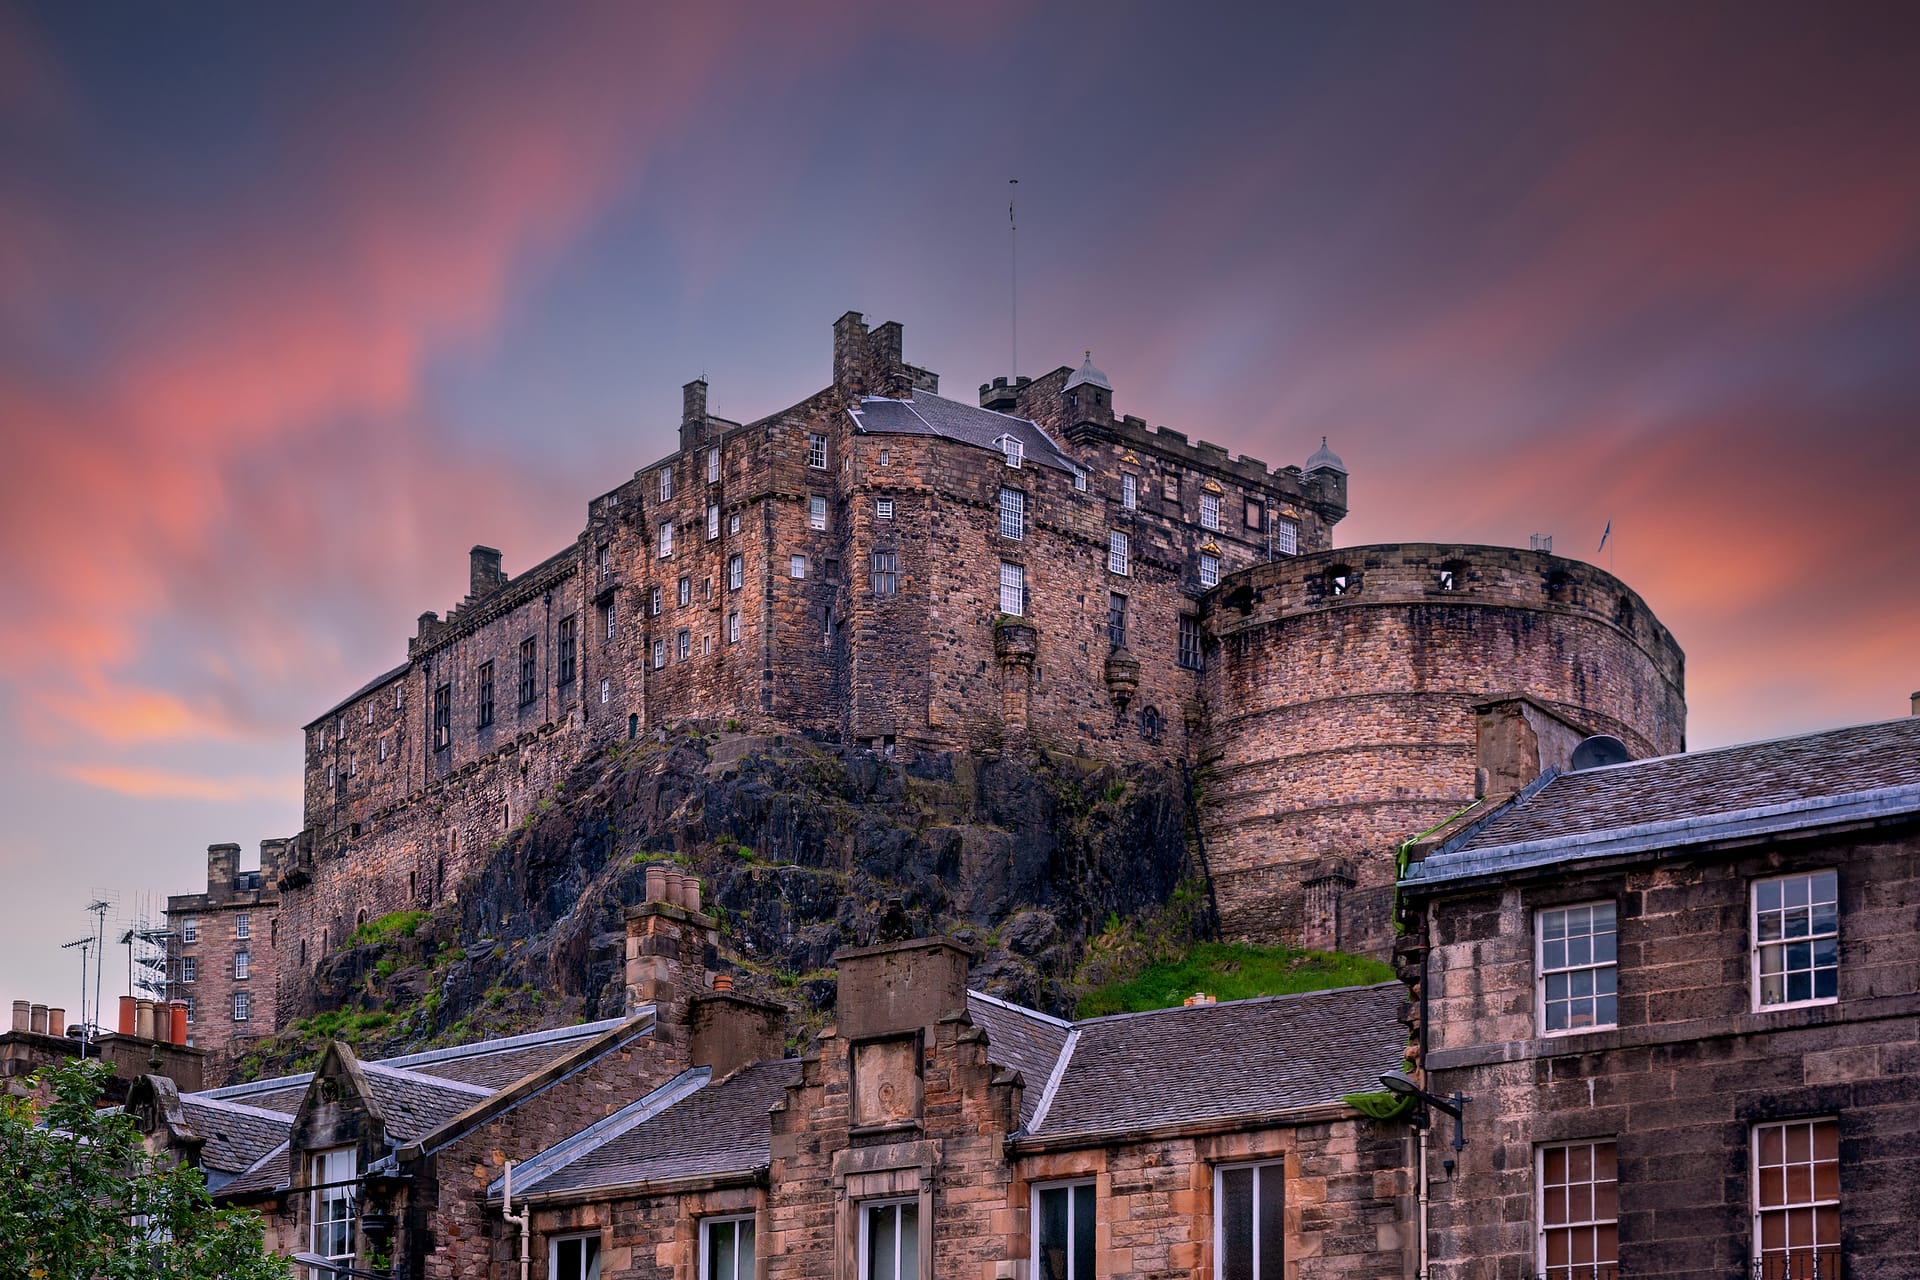 Edinburgh Castle from Heriot place